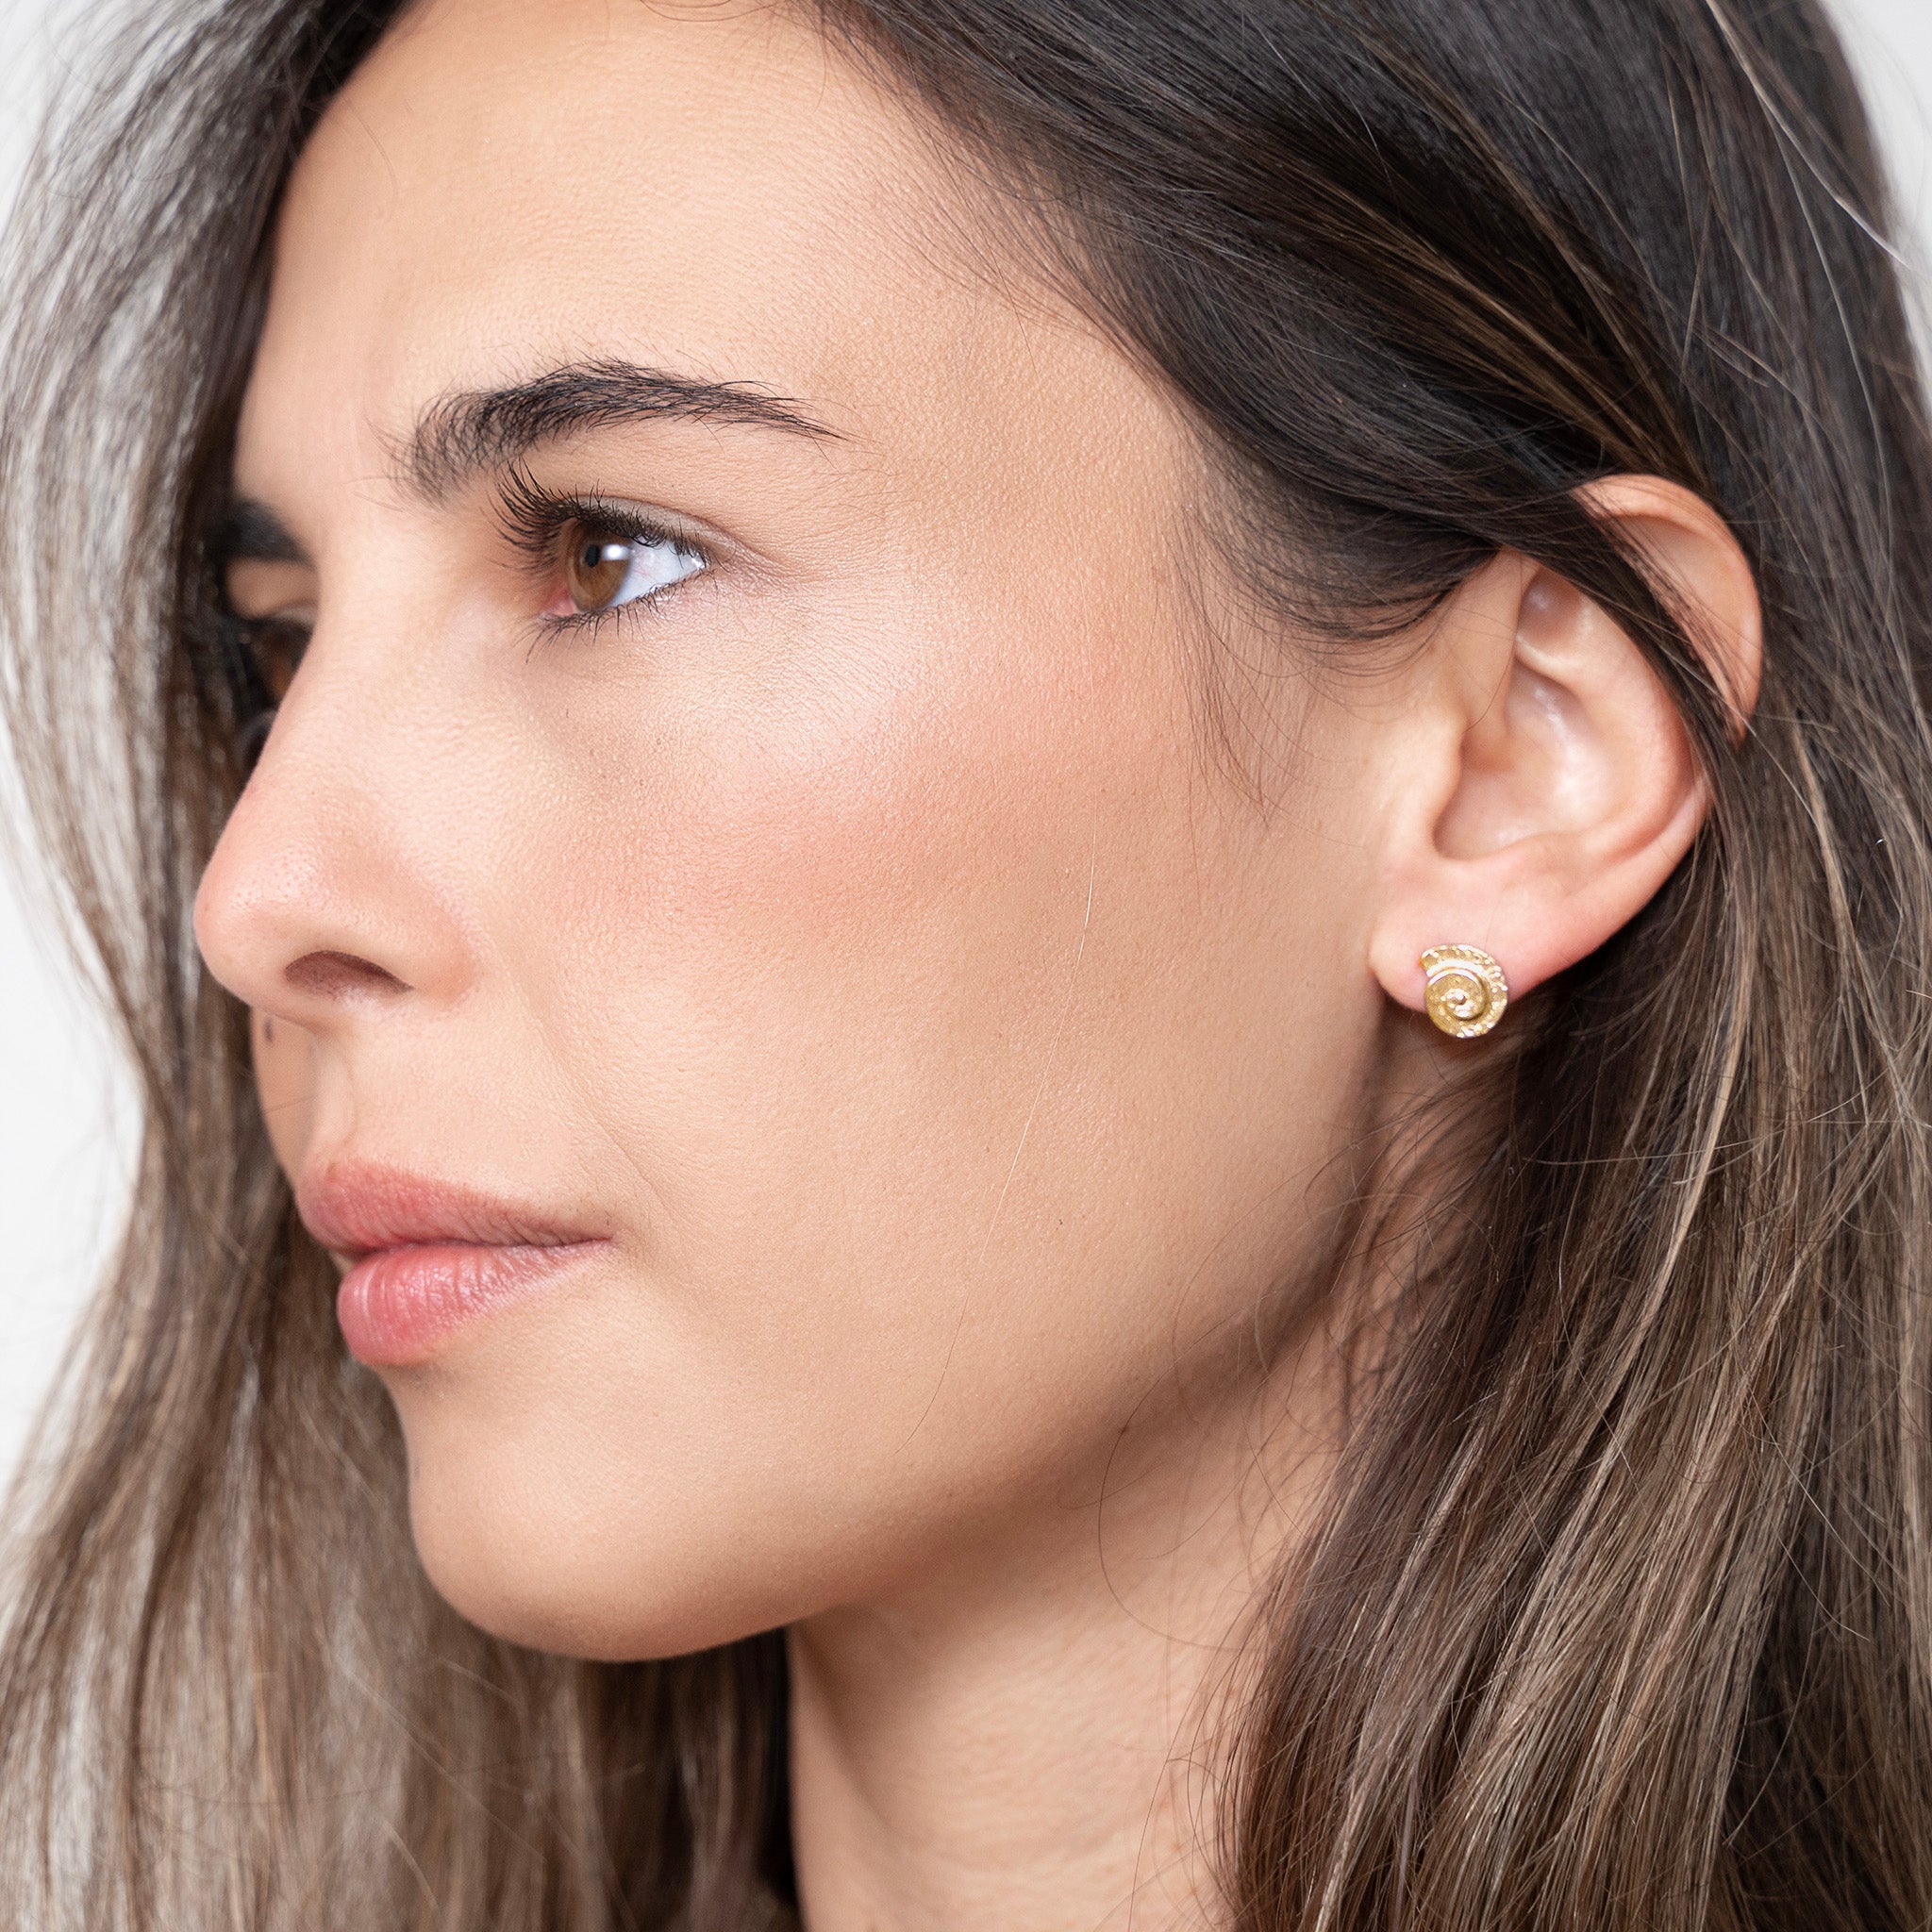 Classic and elegant yellow gold stud earrings with a textured arched spiral on a model. 